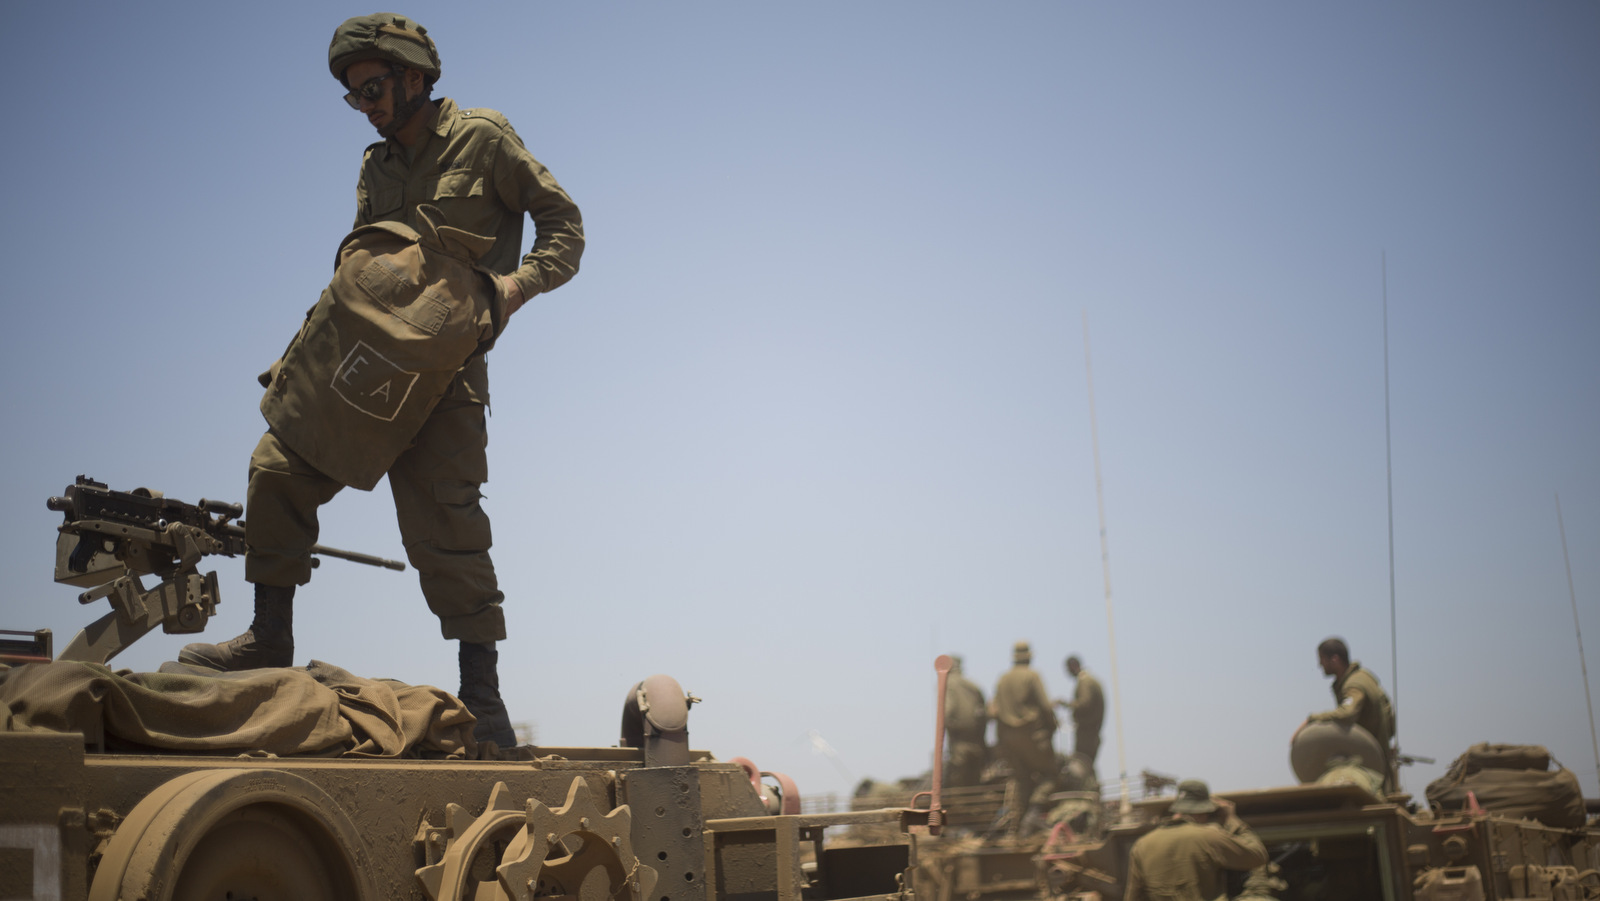 Israeli soldiers stand on top of armored military vehicles during training exercises in the Israeli-occupied Golan Heights, near the border with Syria, Wednesday, June 17, 2015. Syrian rebels launched a wide-ranging offensive against Syrian government positions near the Golan Heights on Wednesday, after tit-for-tat shelling in and around Damascus left at least 33 people dead, activists said. Insurgents have been on the offensive in southern Syria for the past three months, capturing military bases, villages and a border crossing point with Jordan. (AP Photo/Ariel Schalit)